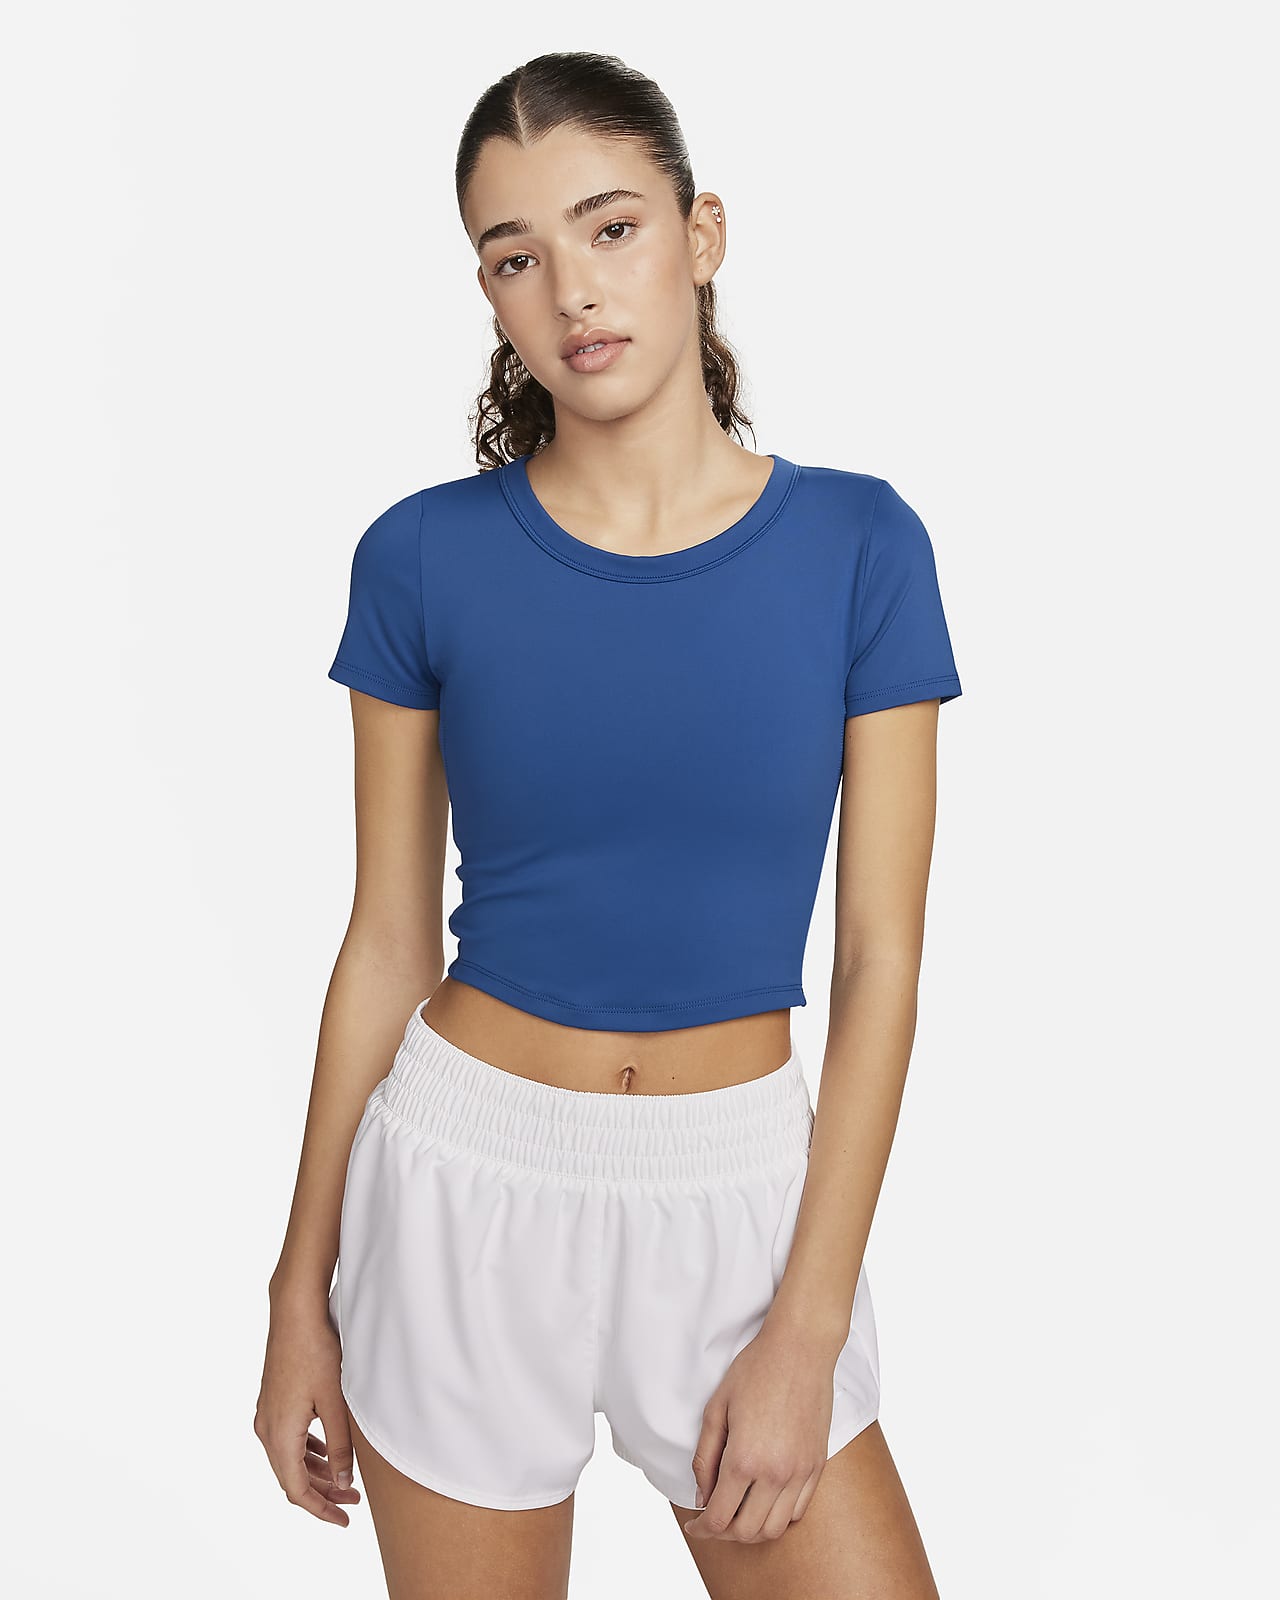 Crop top Dri-FIT à manches courtes Nike One Fitted pour femme